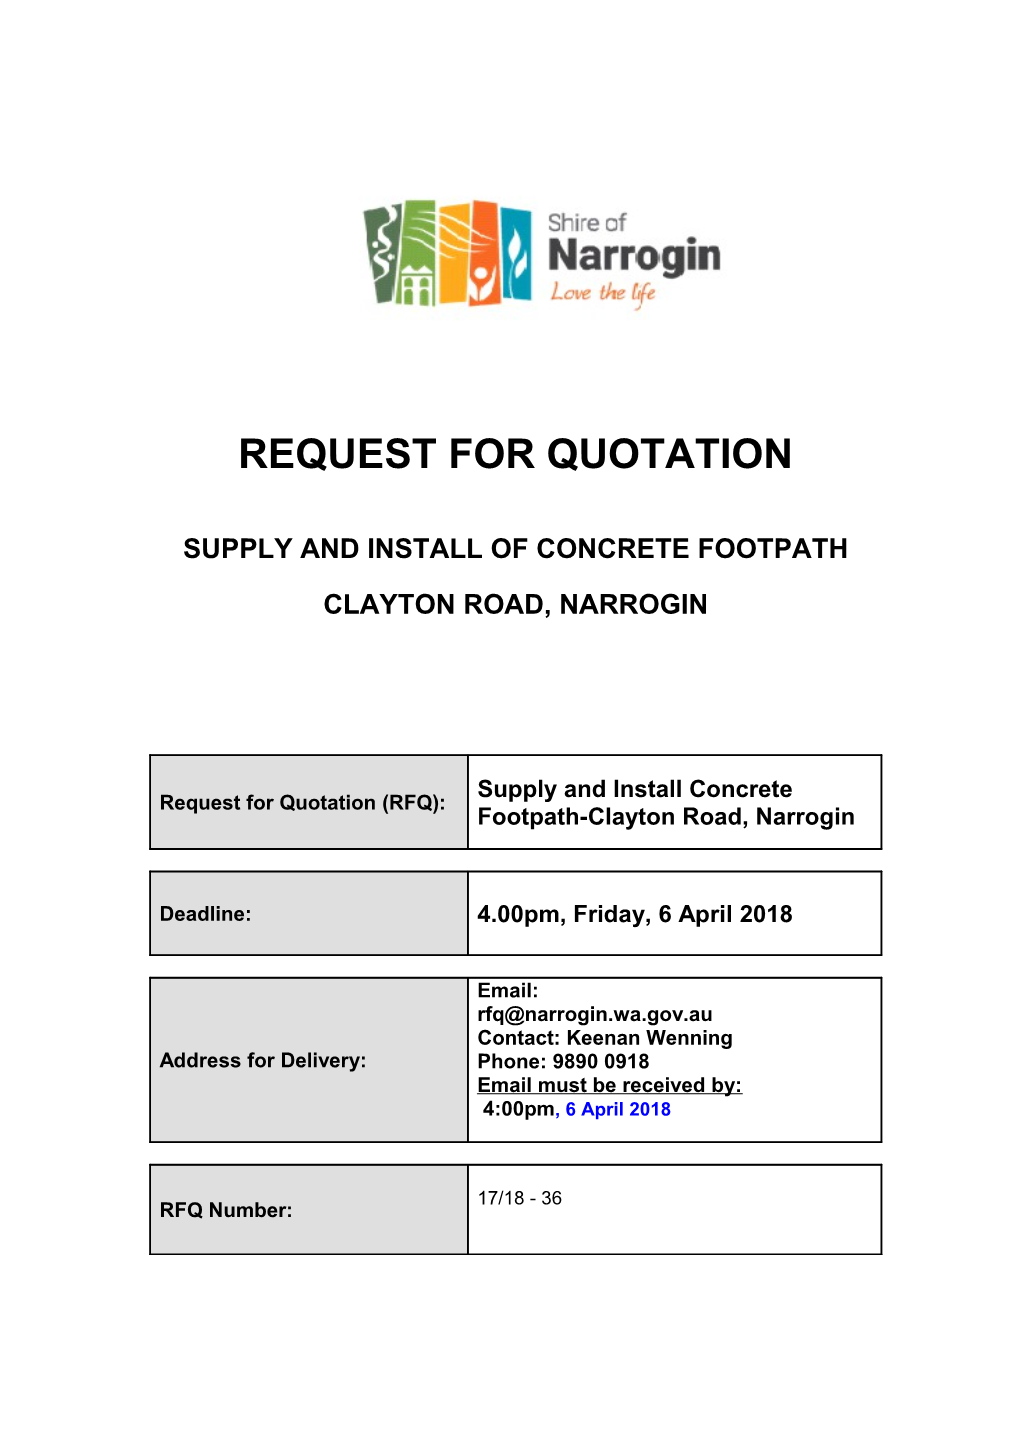 RFQ Supply and Install of Concrete Footpath-Clayton Road Narrogin